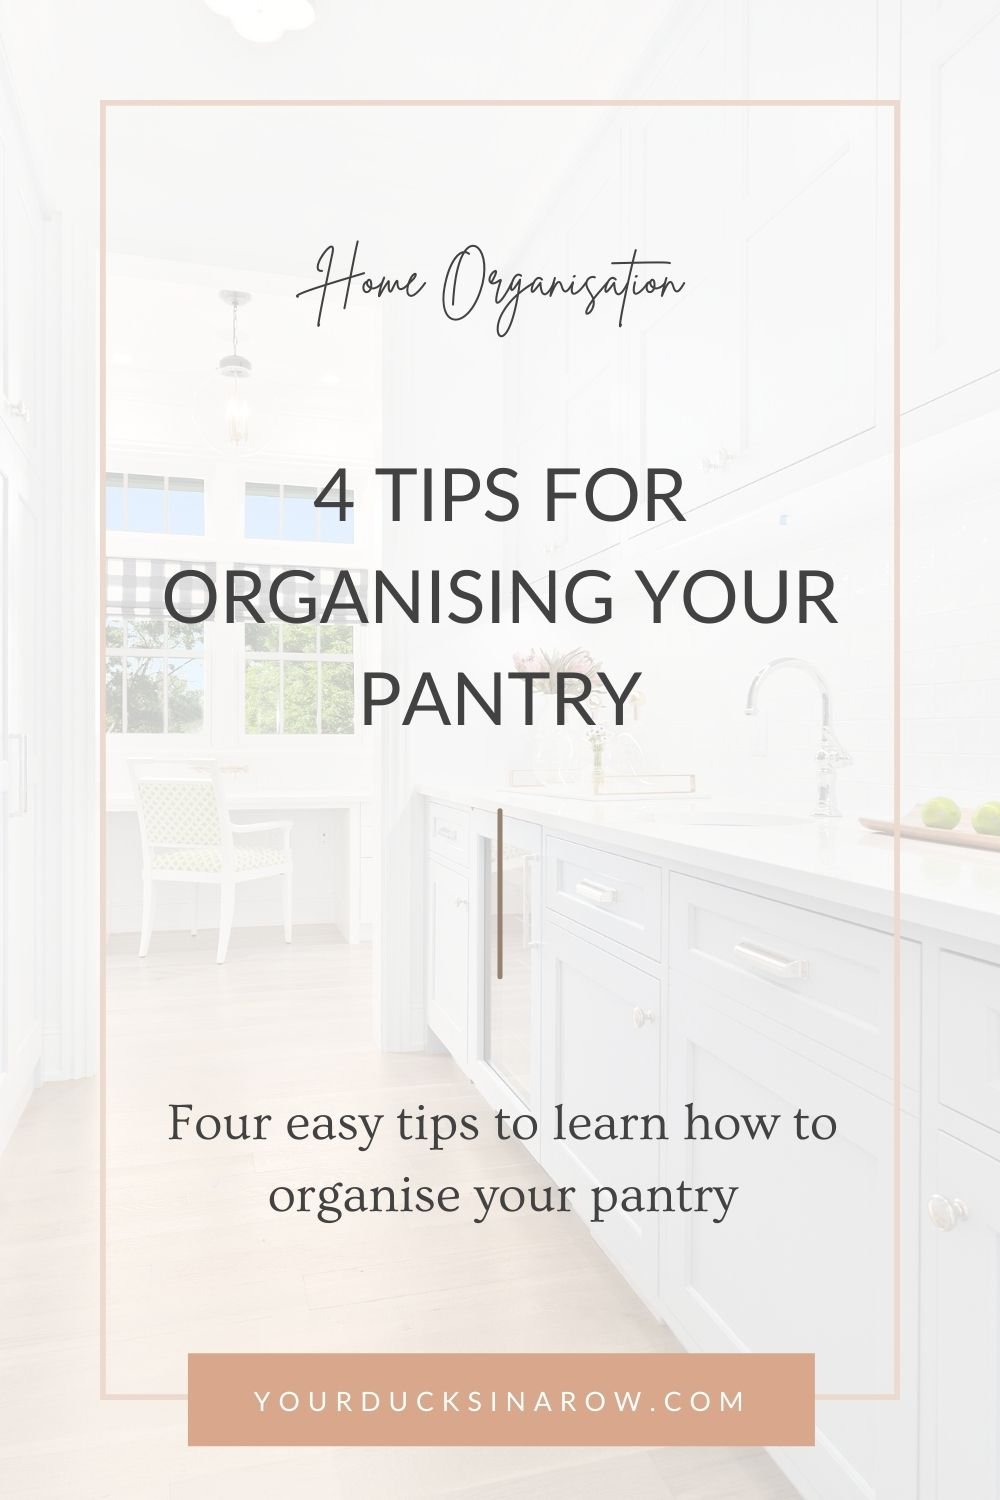 4 Tips for Organising Your Pantry